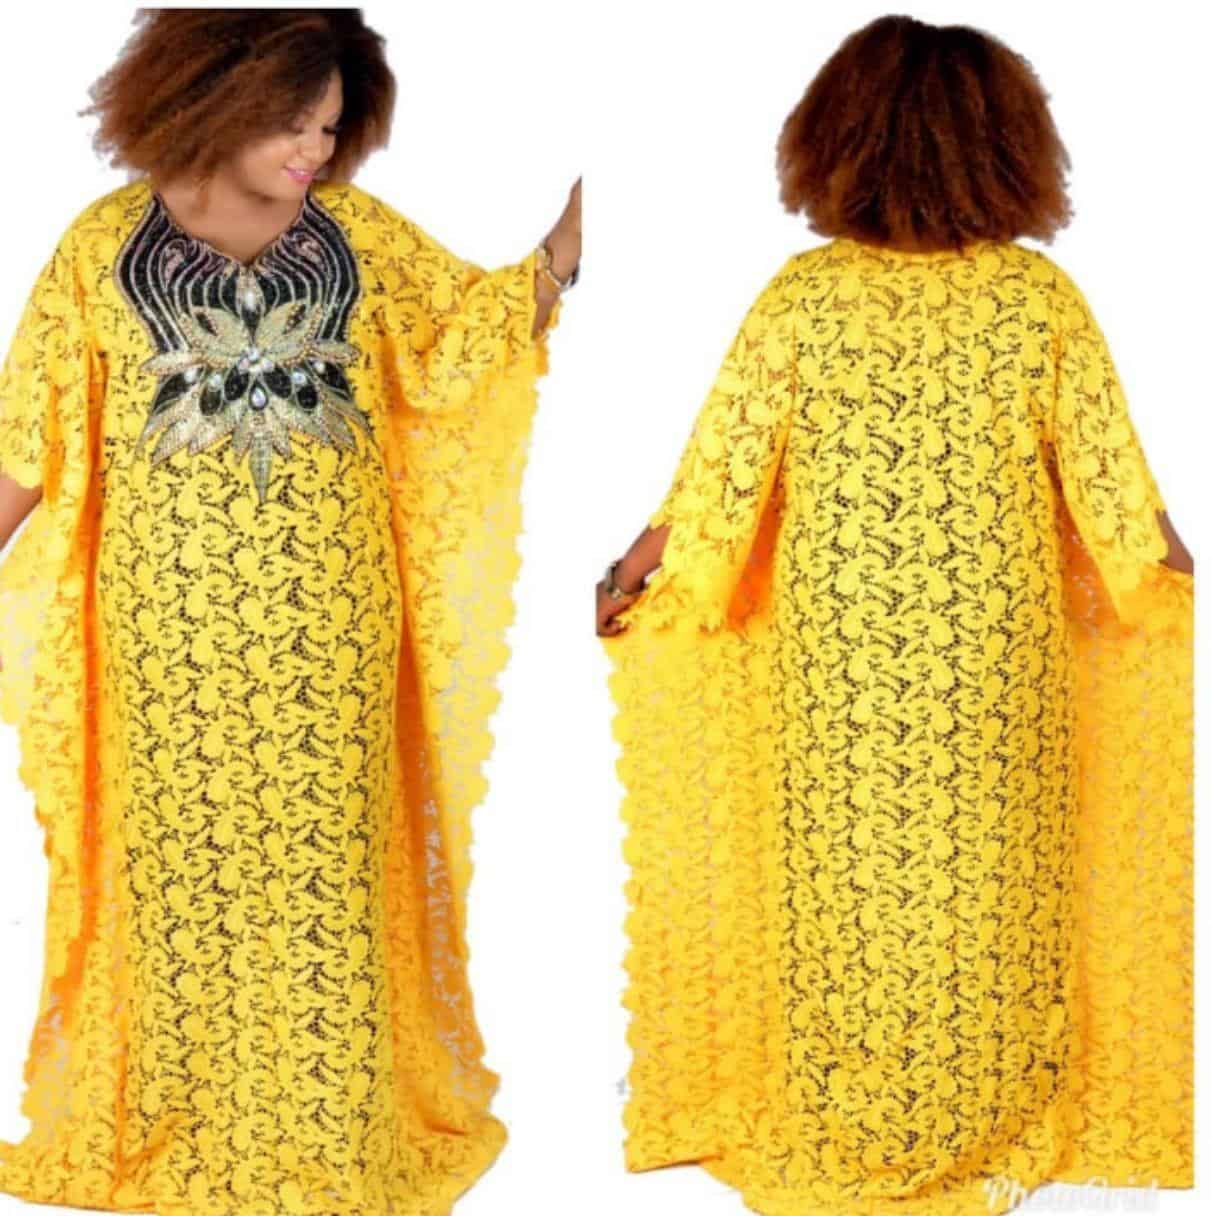 Lace African Dresses For Women African Clothes Dashiki Dress Boubou Africain Dresses For Women Ankara Dress Women's Dress 2019